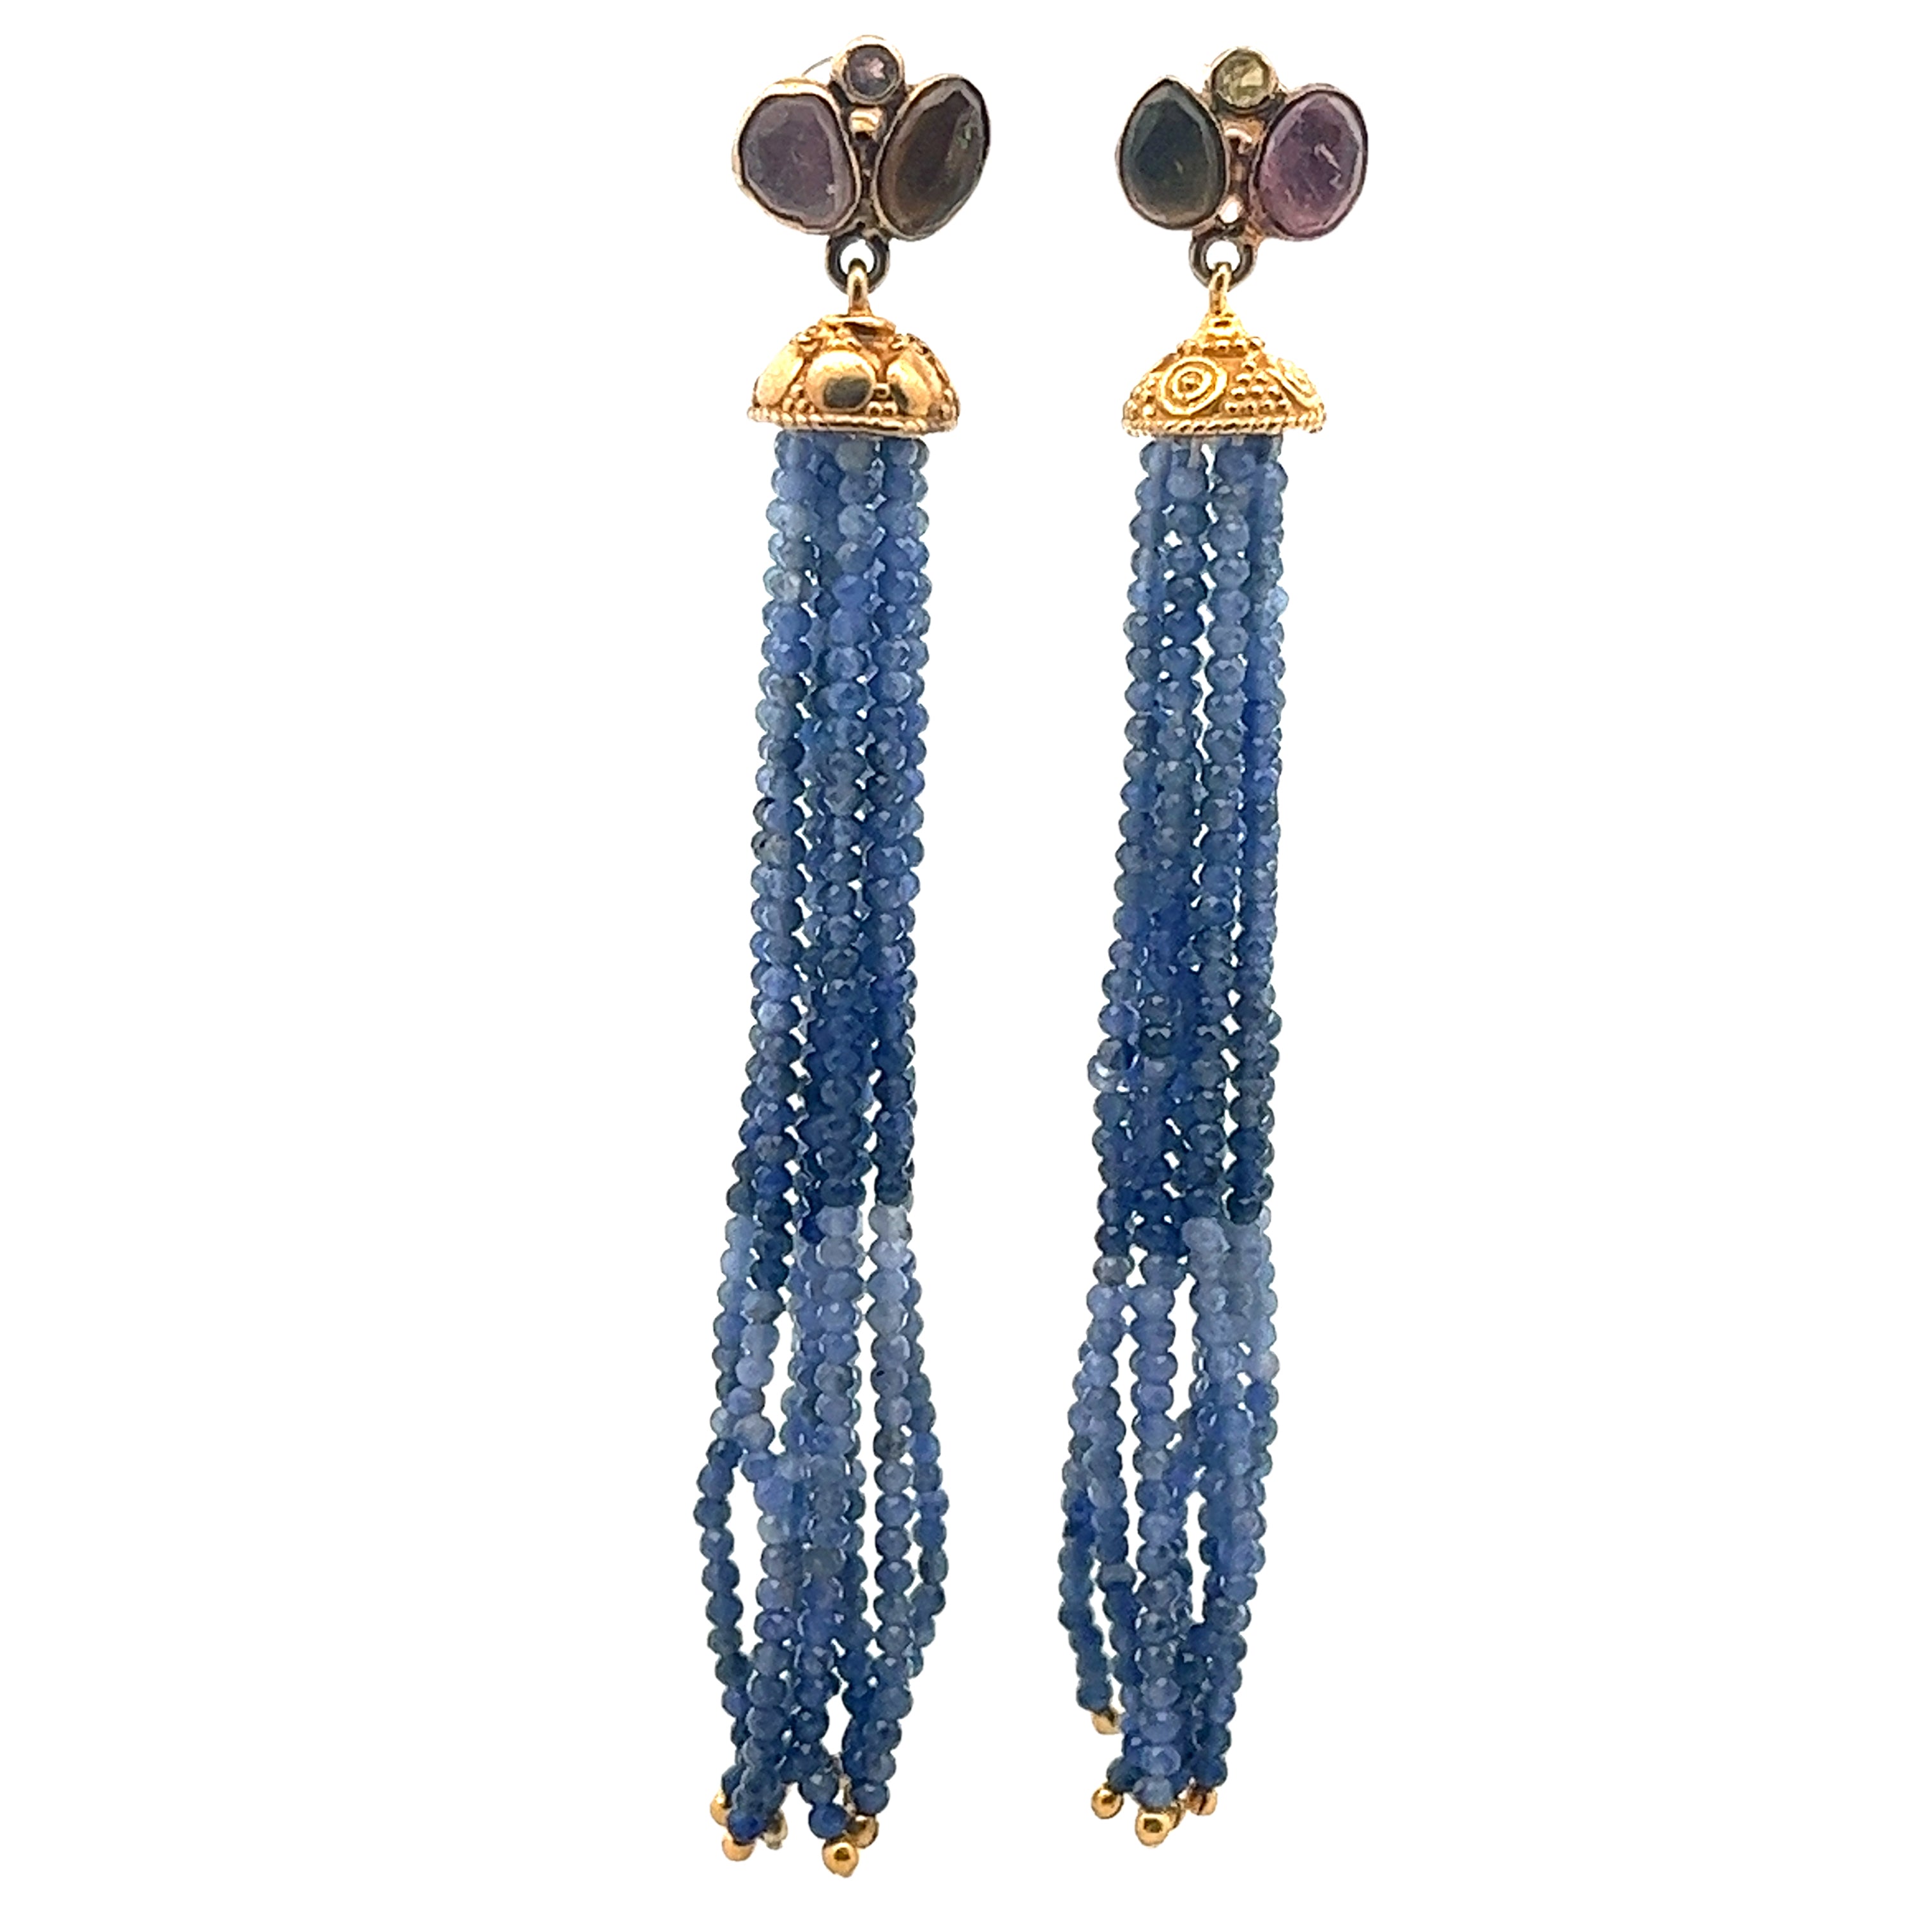 EARRINGS TASSELS WITH CRYSTALS